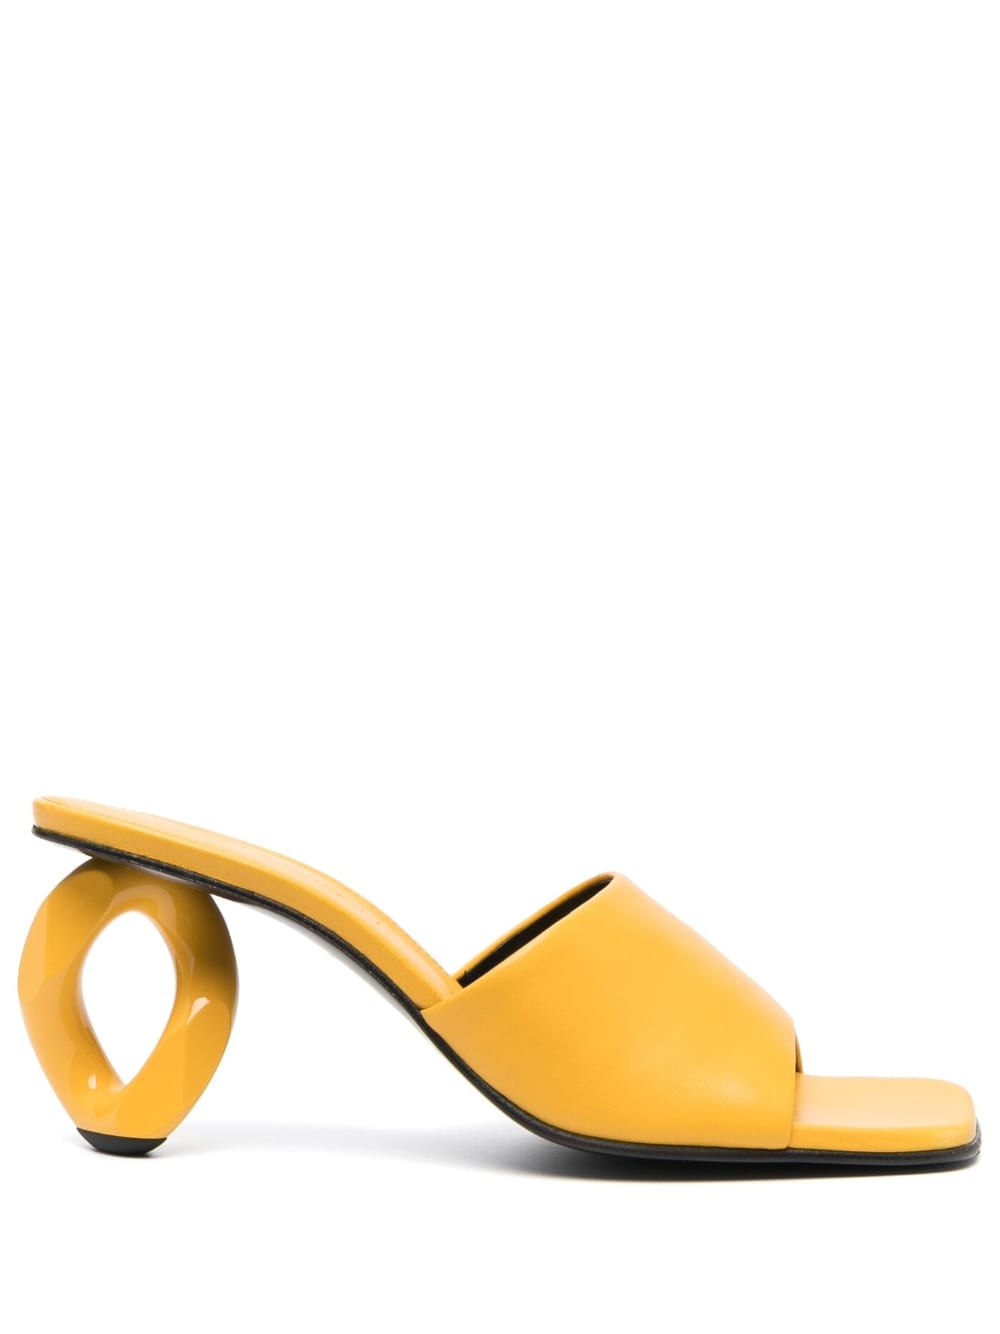 JW Anderson 80mm leather sandals - Yellow